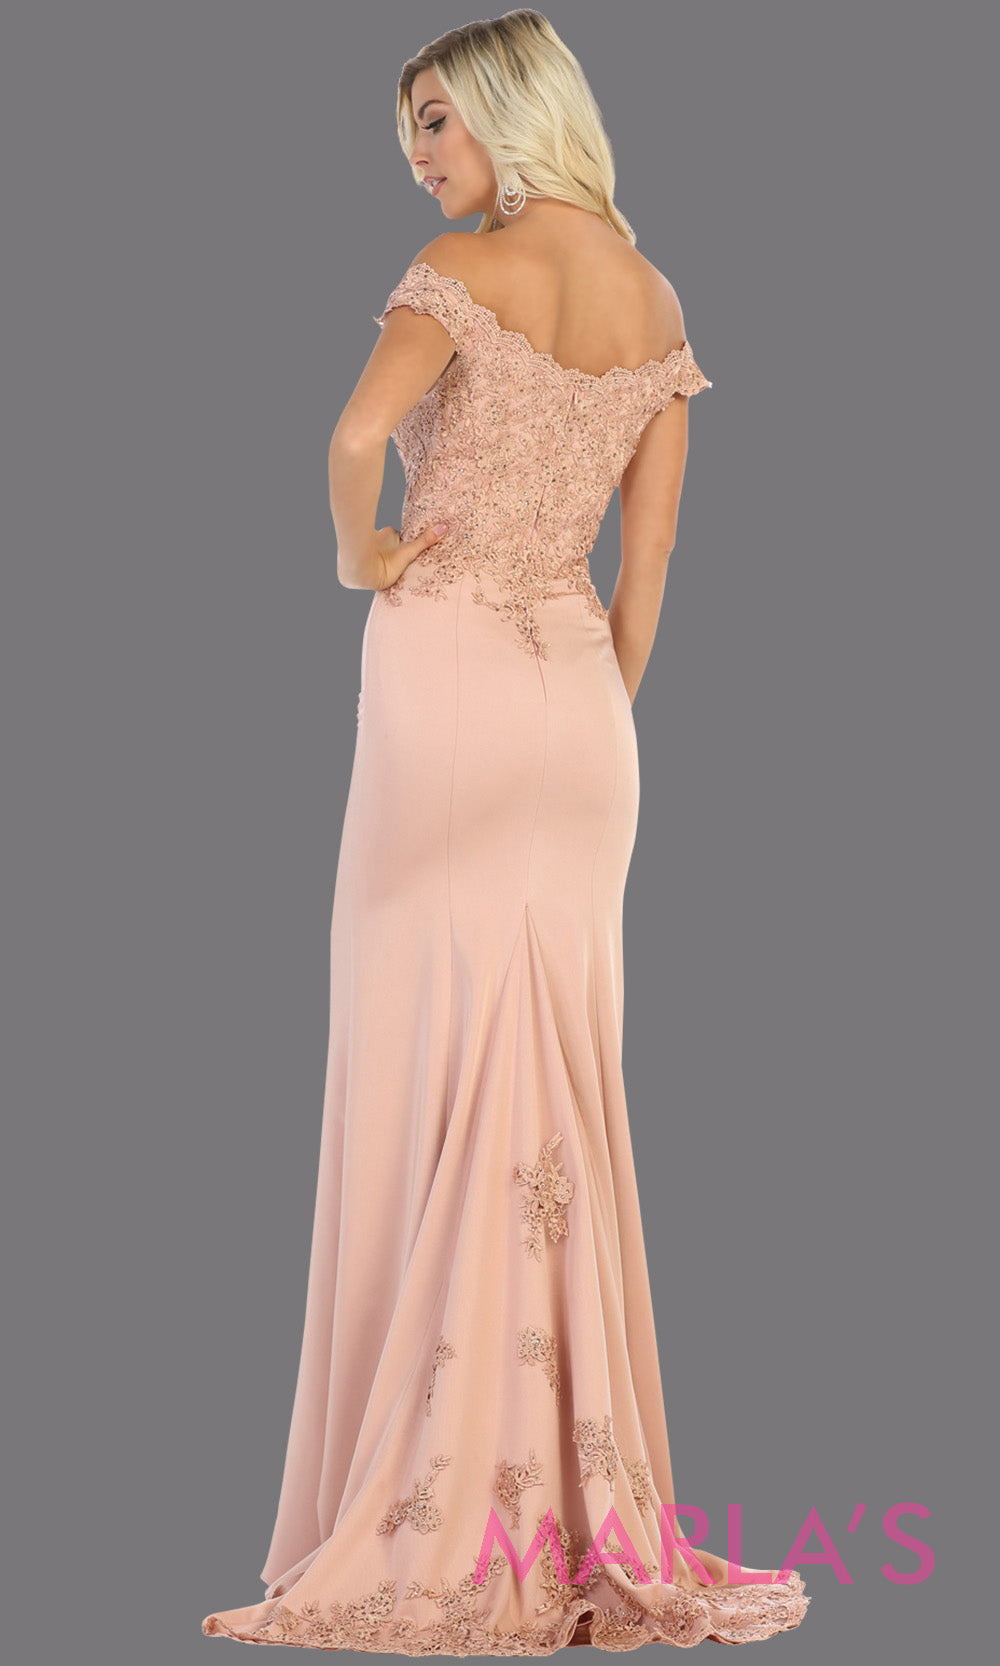 Back of Long sleek & sexy champagne gold evening mermaid dress & lace off shoulder top from mayqueen. This light gold tight fitted evening party gown is perfect for prom, wedding guest dress, guest for prom, formal party, gala, black tie party.jpg